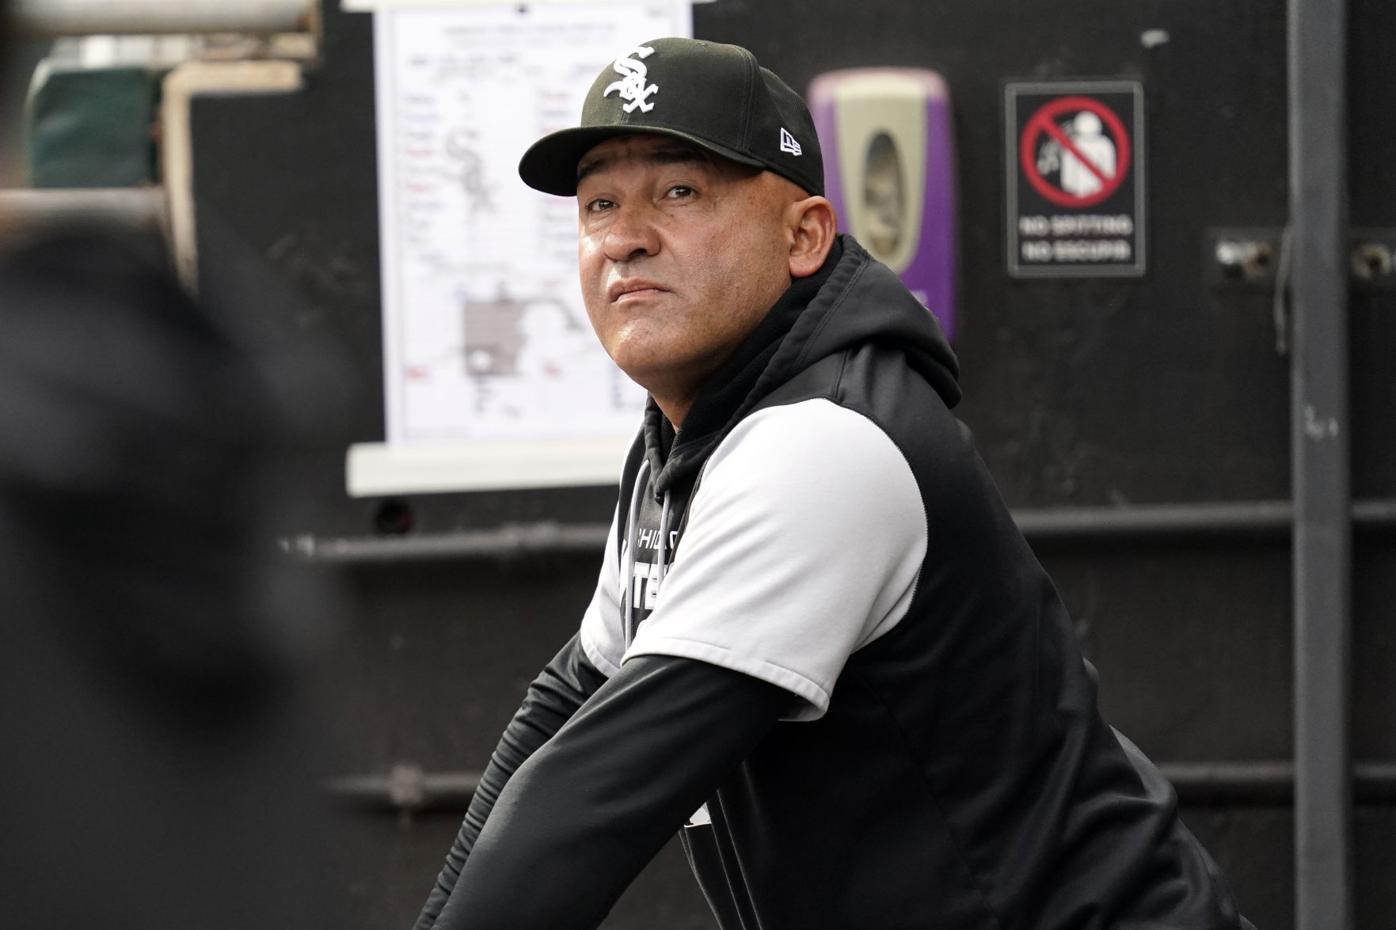 White Sox move on, seek new manager after difficult season